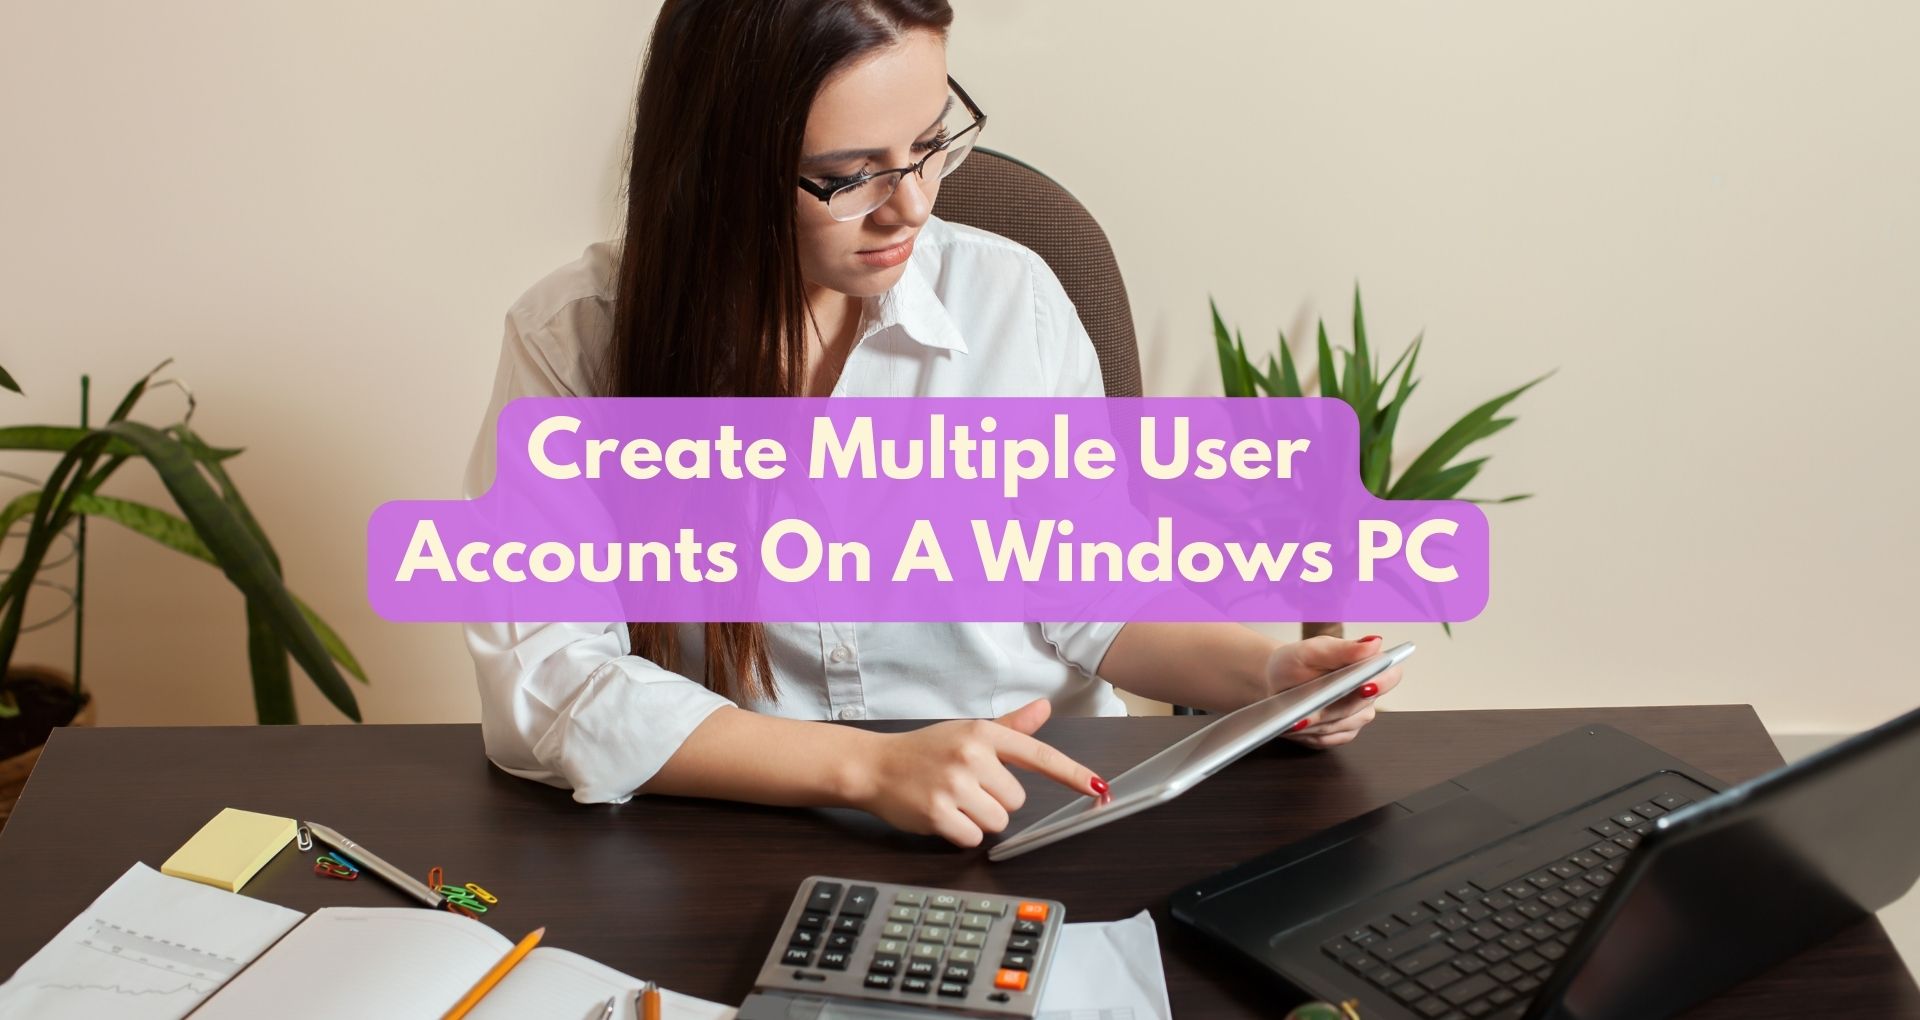 How To Create Multiple User Accounts On A Windows PC?